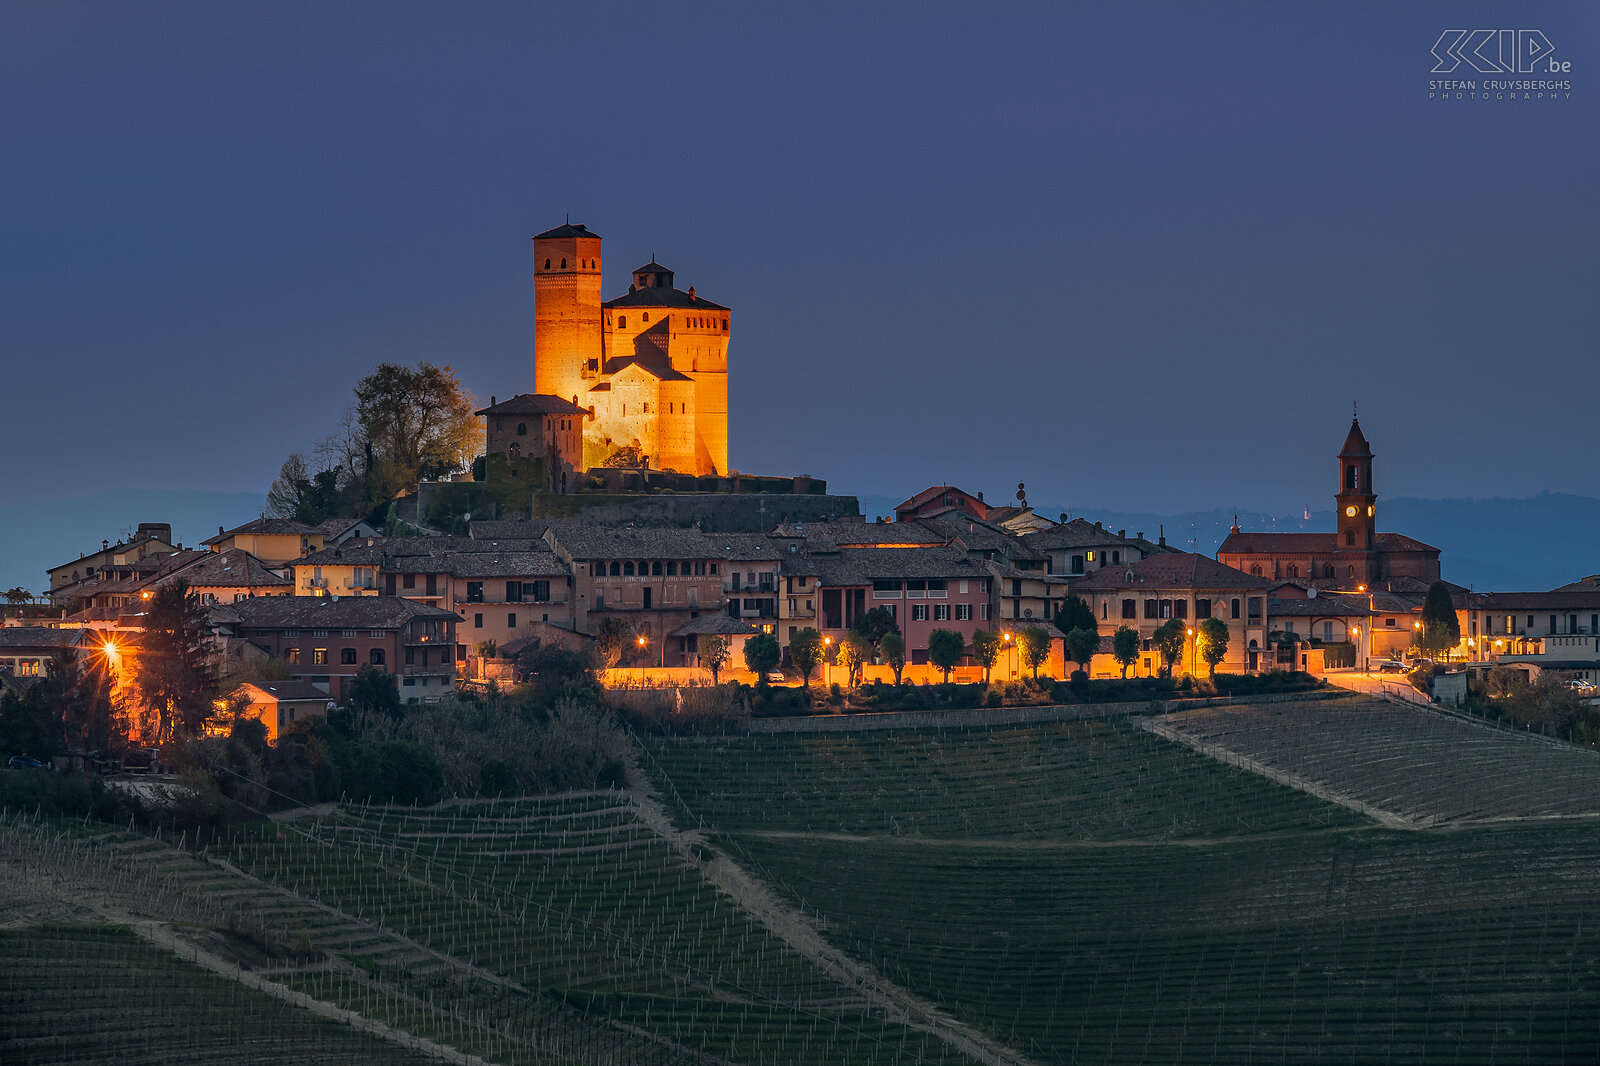 Serralunga d'Alba - By night The castle of Serralunga d'Alba stands out for its square tower and majestic drawbridge. It was a defensive fortress, but at the same time a showpiece of the Falletti family. Stefan Cruysberghs